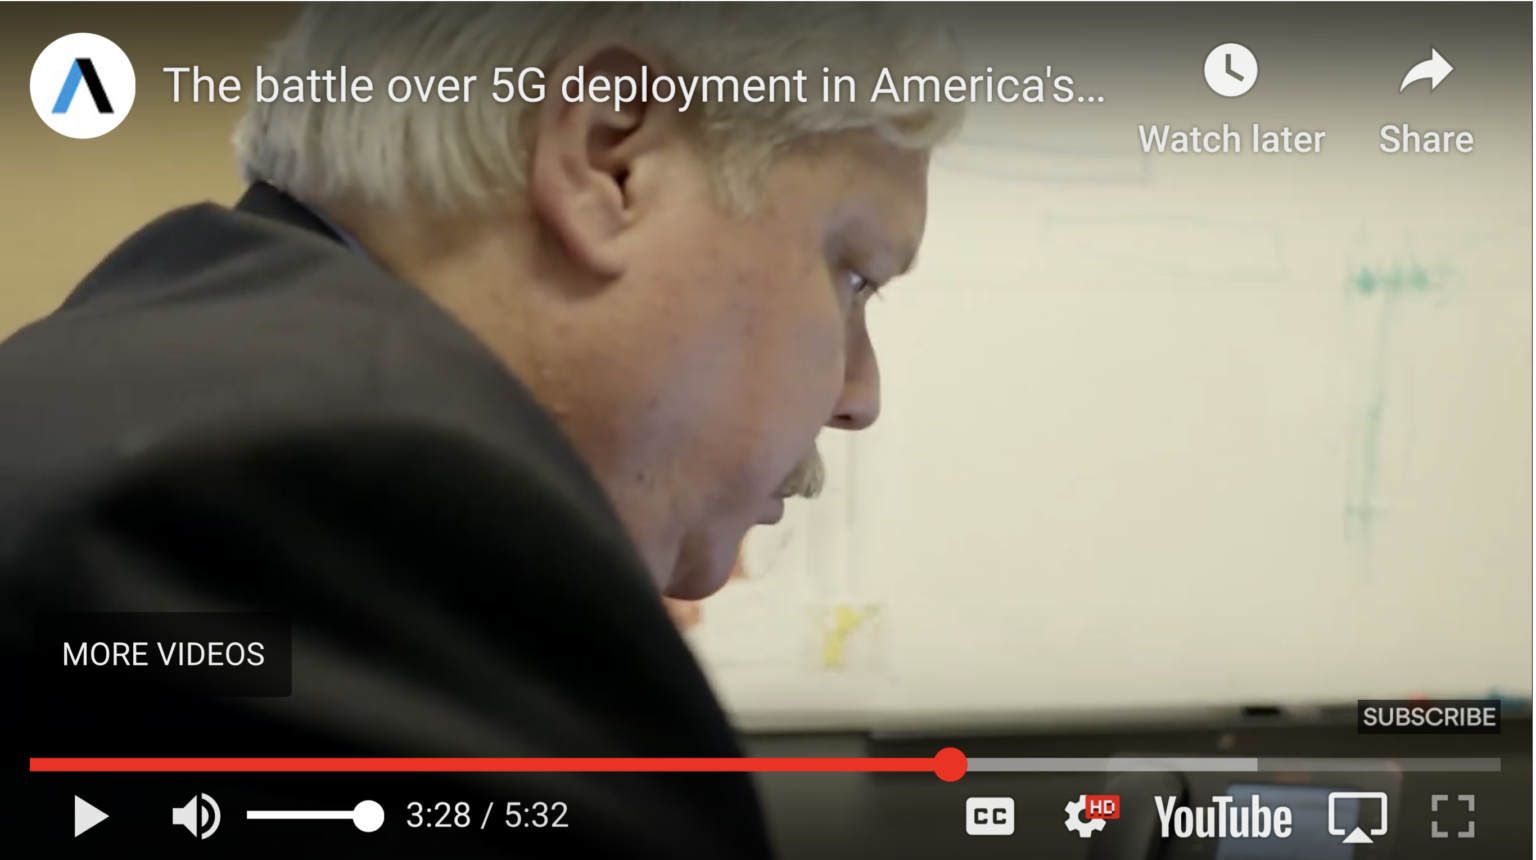 Chris Balch interviewed by Axios about 5G and local government concerns over FCC ruling